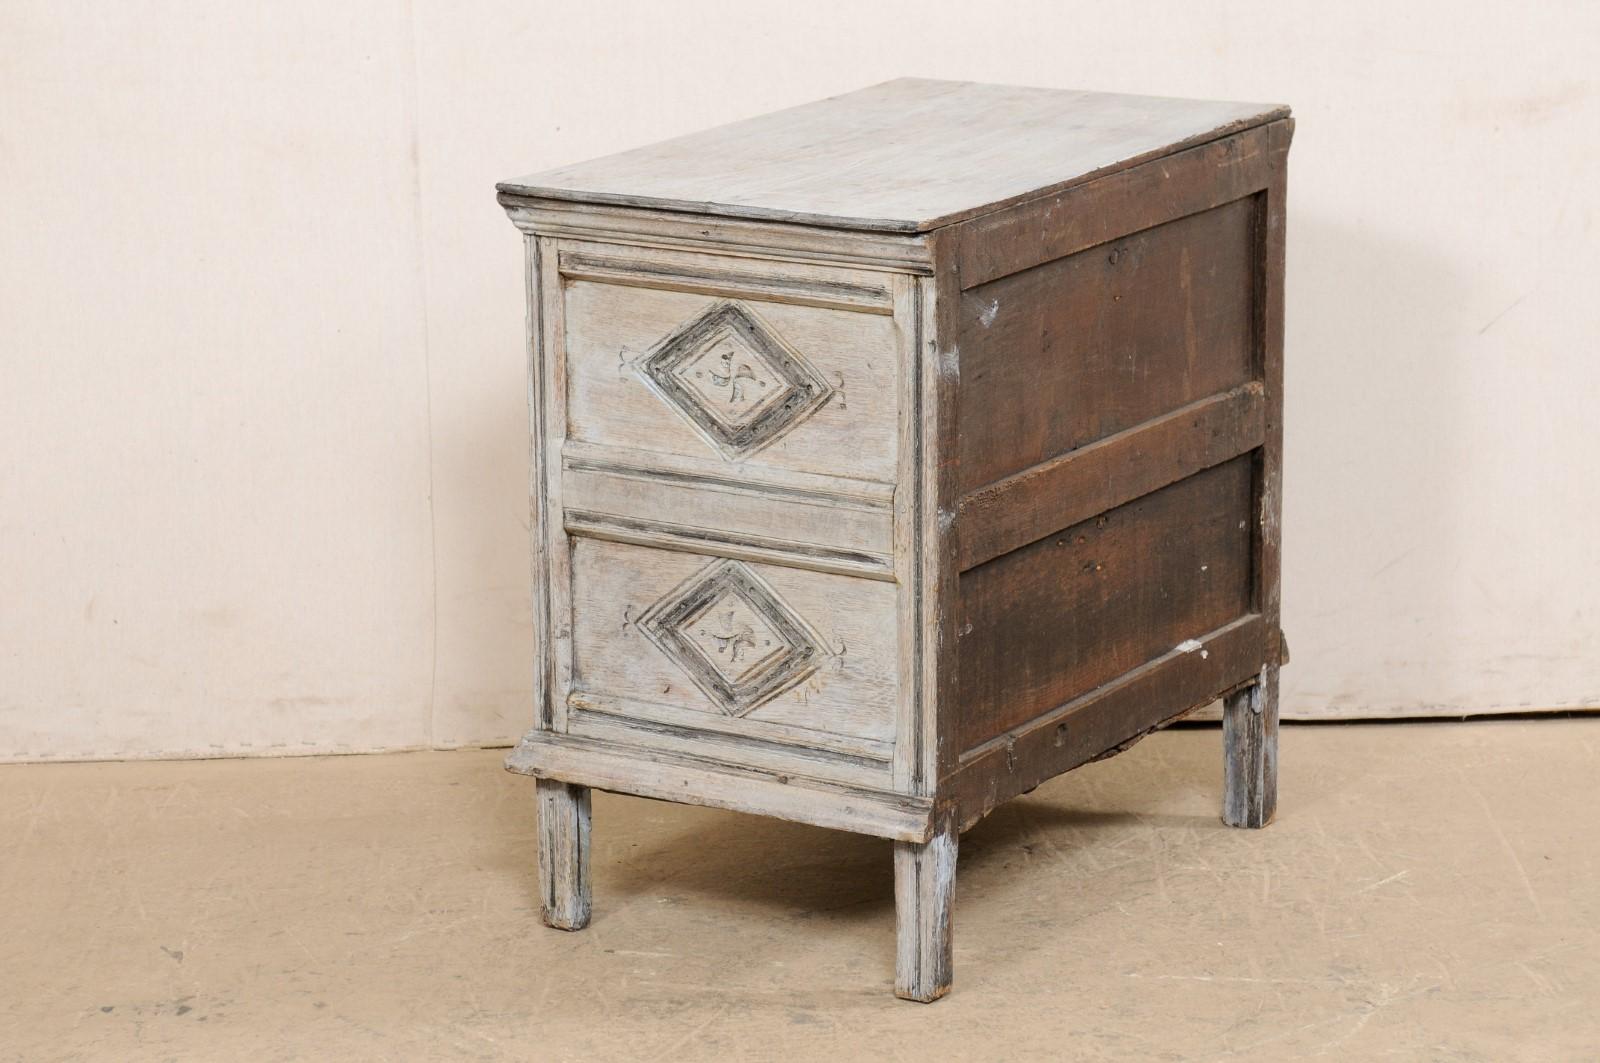 19th C. English Smaller-Sized Chest Adorn in Geometrically Carved Panels  7